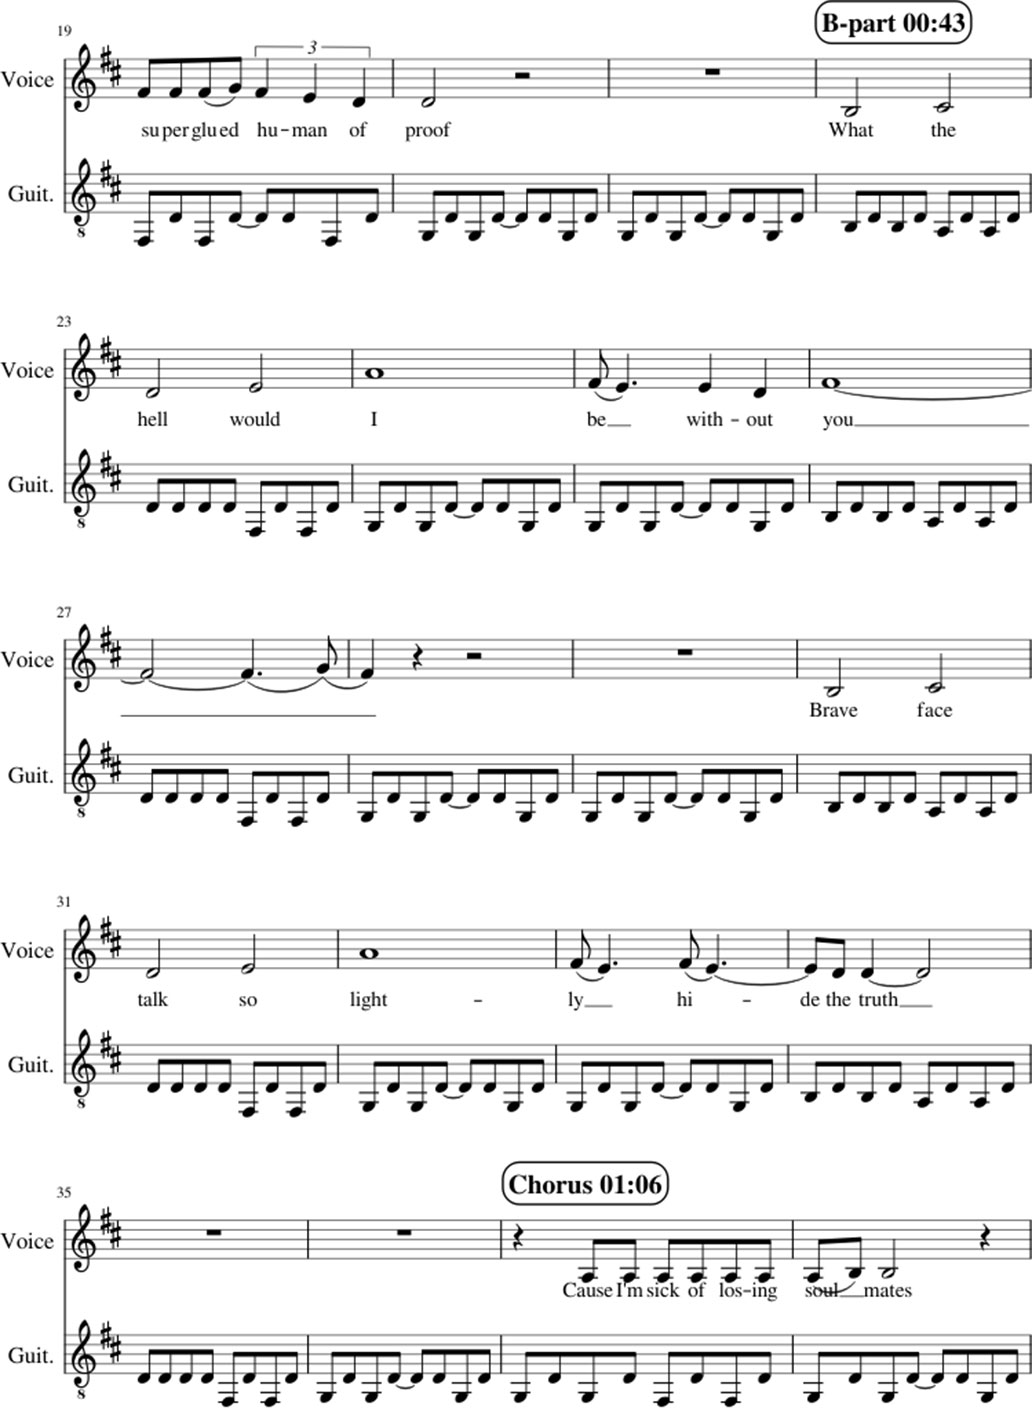 Sick of losing soulmate sheet music notes 2